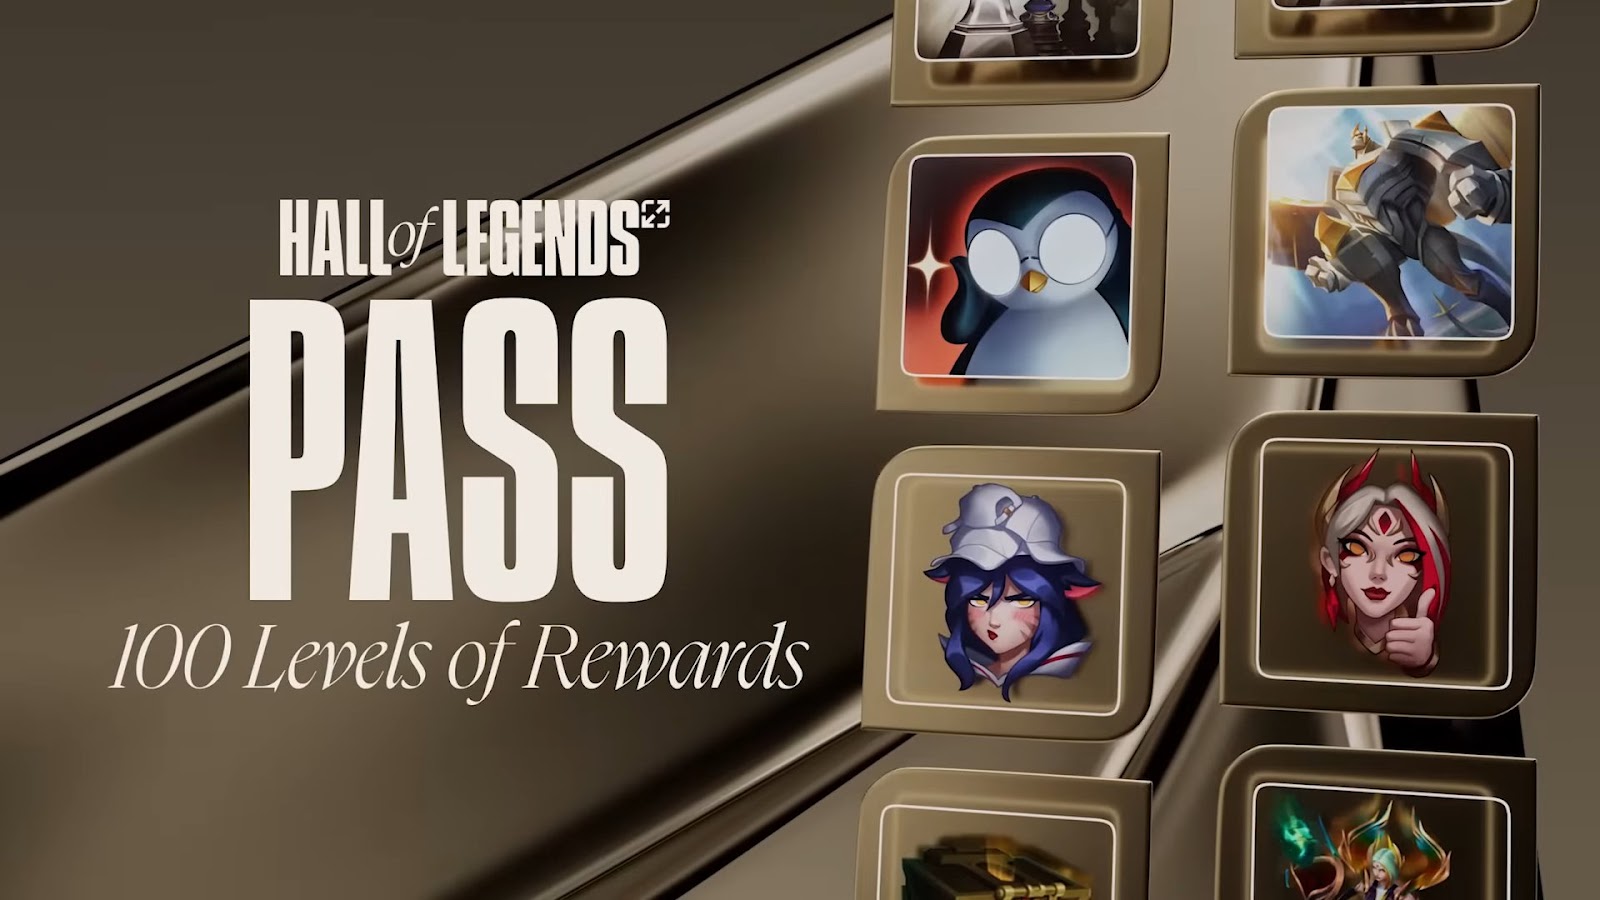 Riot Extends Faker’s Hall of Legends Event: Was it Due to Unmet Investment Expectations?